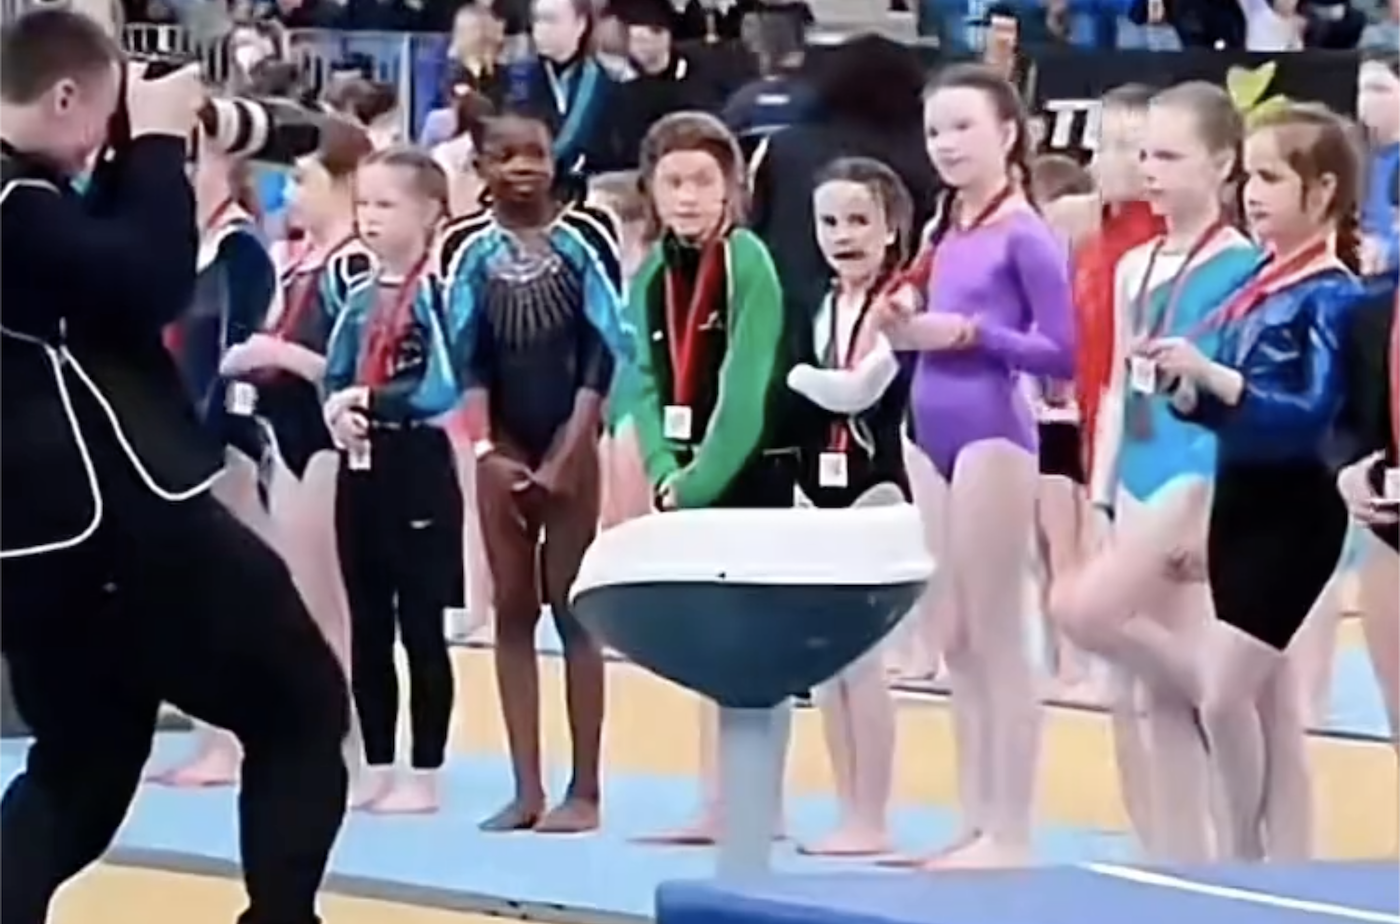 Irish Gymnastics Officials Skipped This Black Girl Gymnast At A Medal Ceremony And People Are Furious